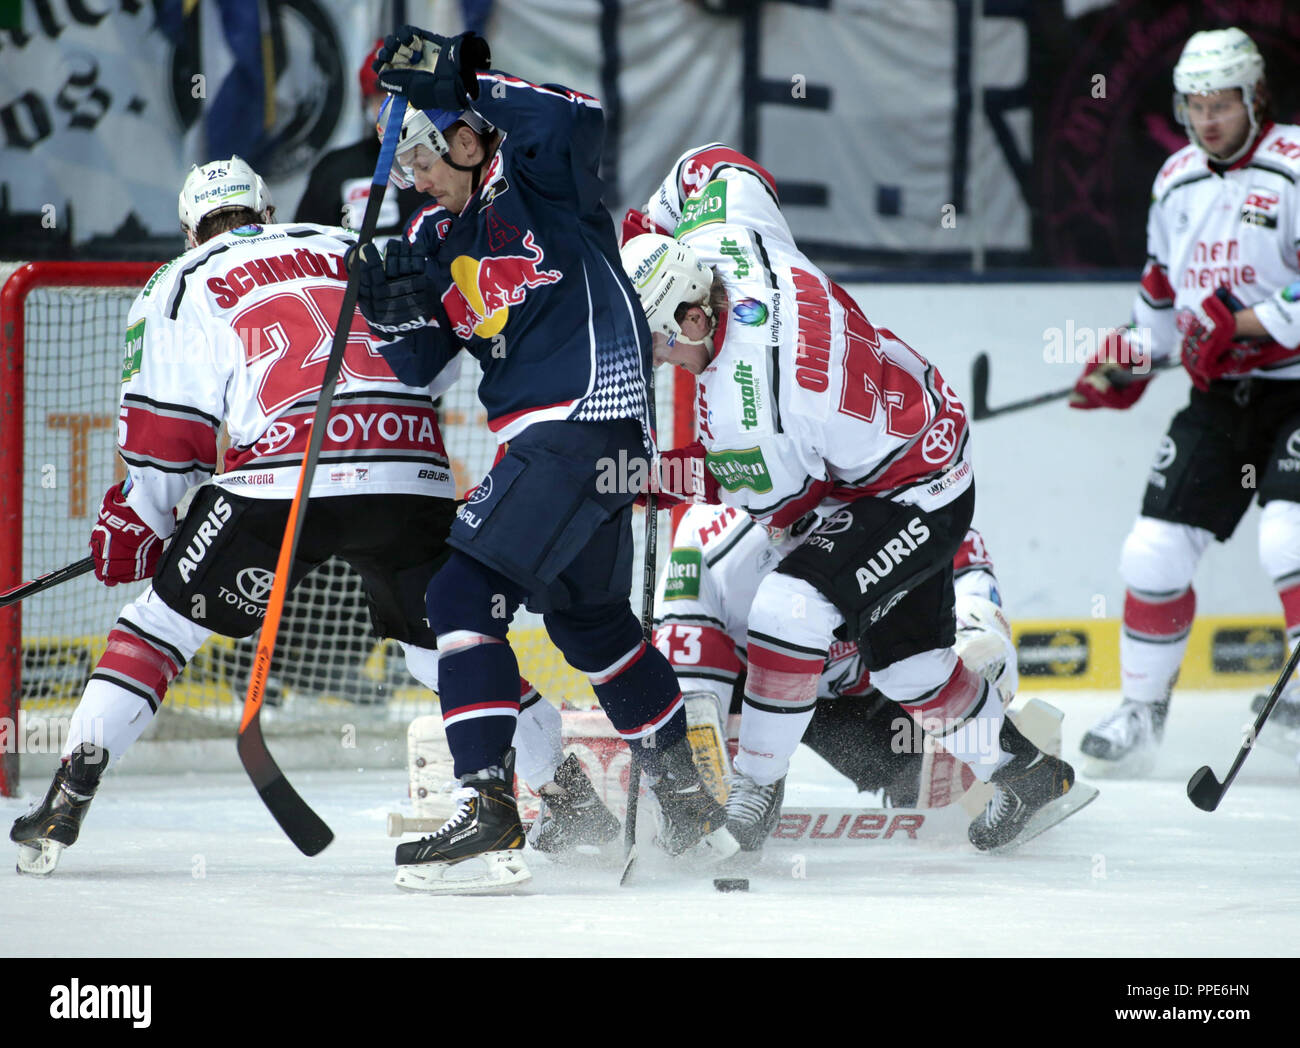 Ice hockey: EHC Red Bull Muenchen - Koelner Haie, a fight between Alexander Barta  from and EHC and Daniel Schmoelz (l.) and Marcel Ohmann (r.) from Koelner Haie. Stock Photo